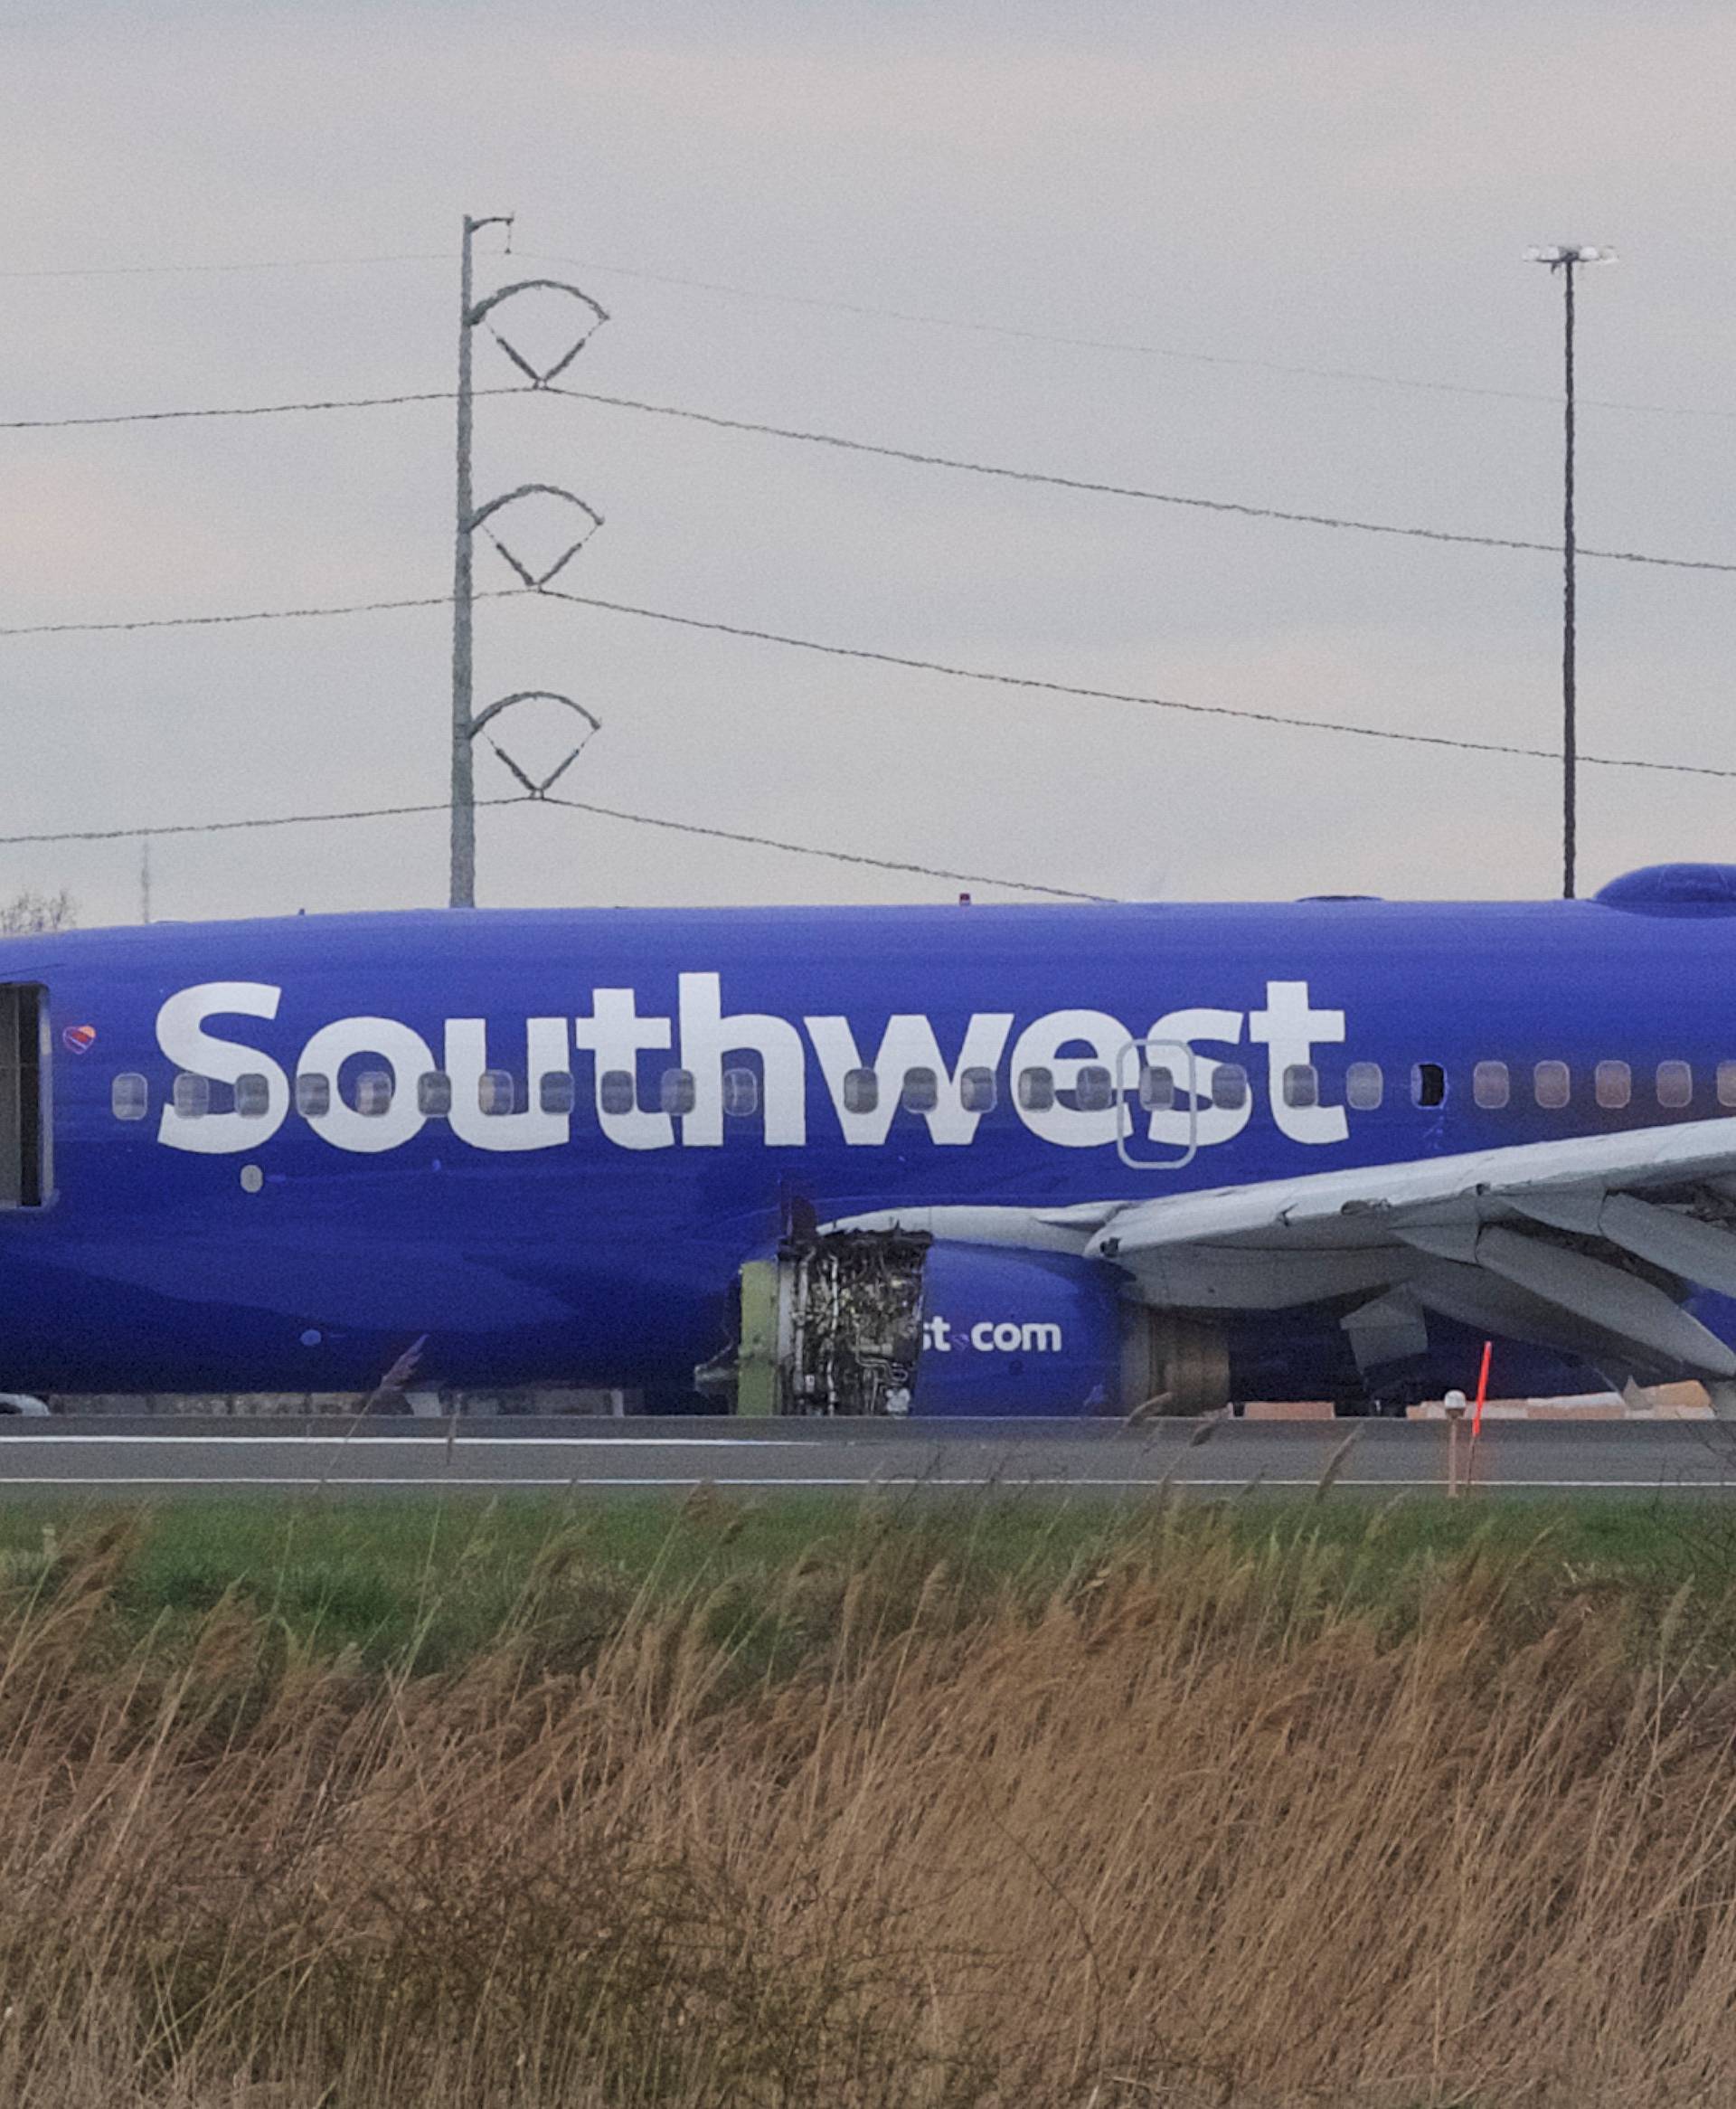 Emergency personnel monitor the damaged engine of Southwest Airlines Flight 1380, which diverted to the Philadelphia International Airport this morning, in Philadelphia, Pennsylvania